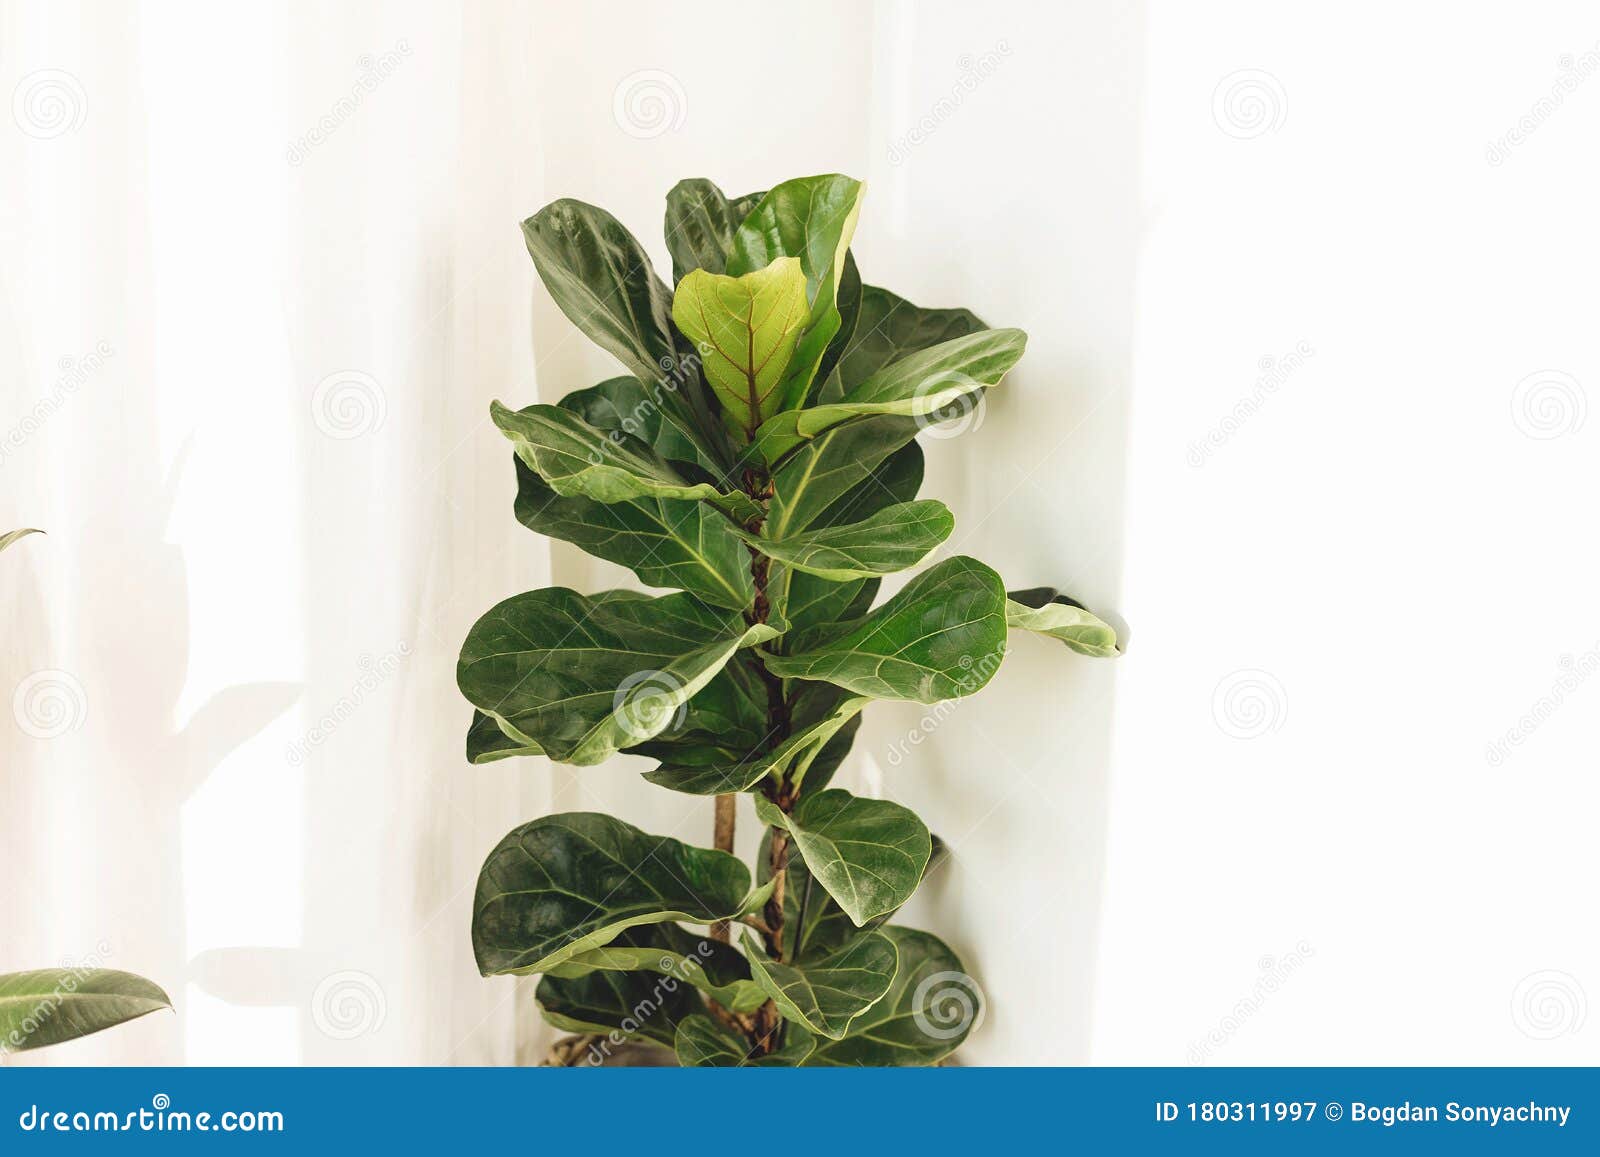 ficus lyrata. beautiful fiddle leaf tree leaves on white background. fresh new green leaves growing from fig tree. houseplant.